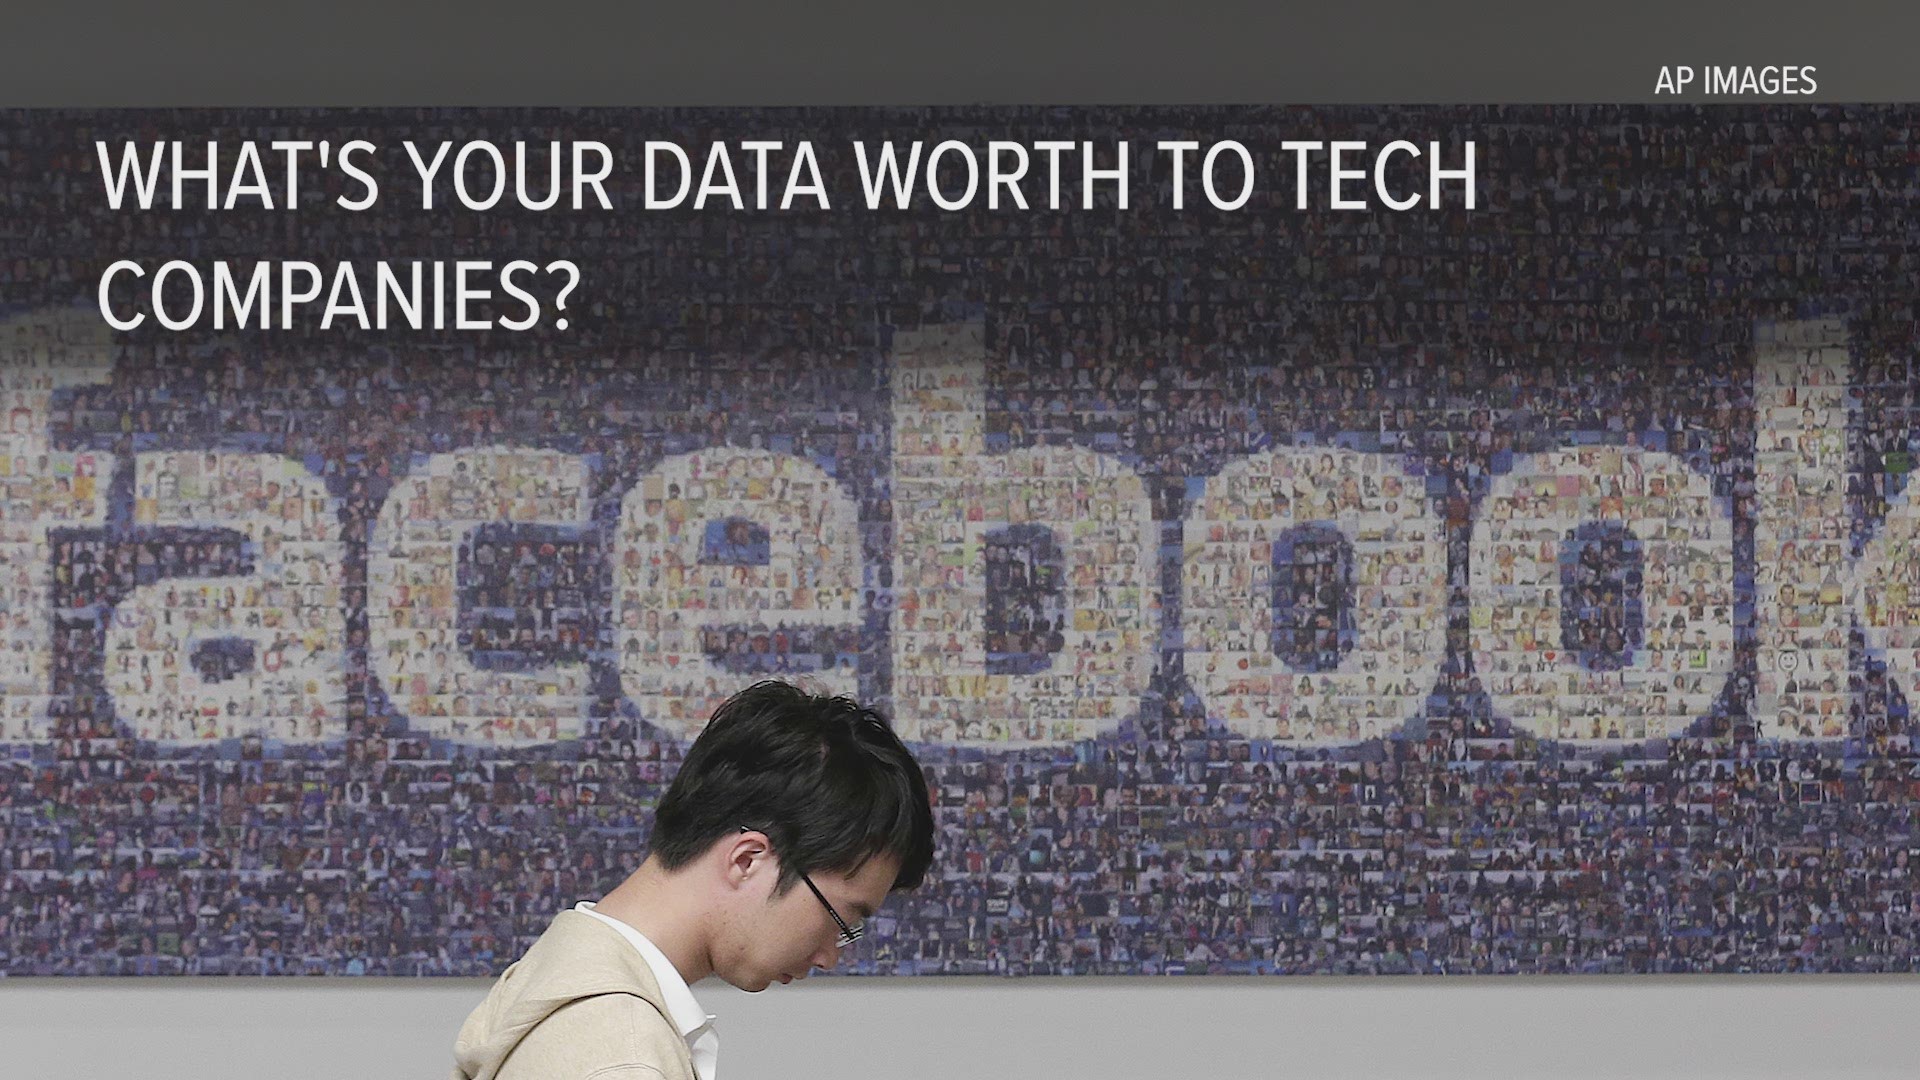 A new bill would force tech companies to tell you what your data is worth.